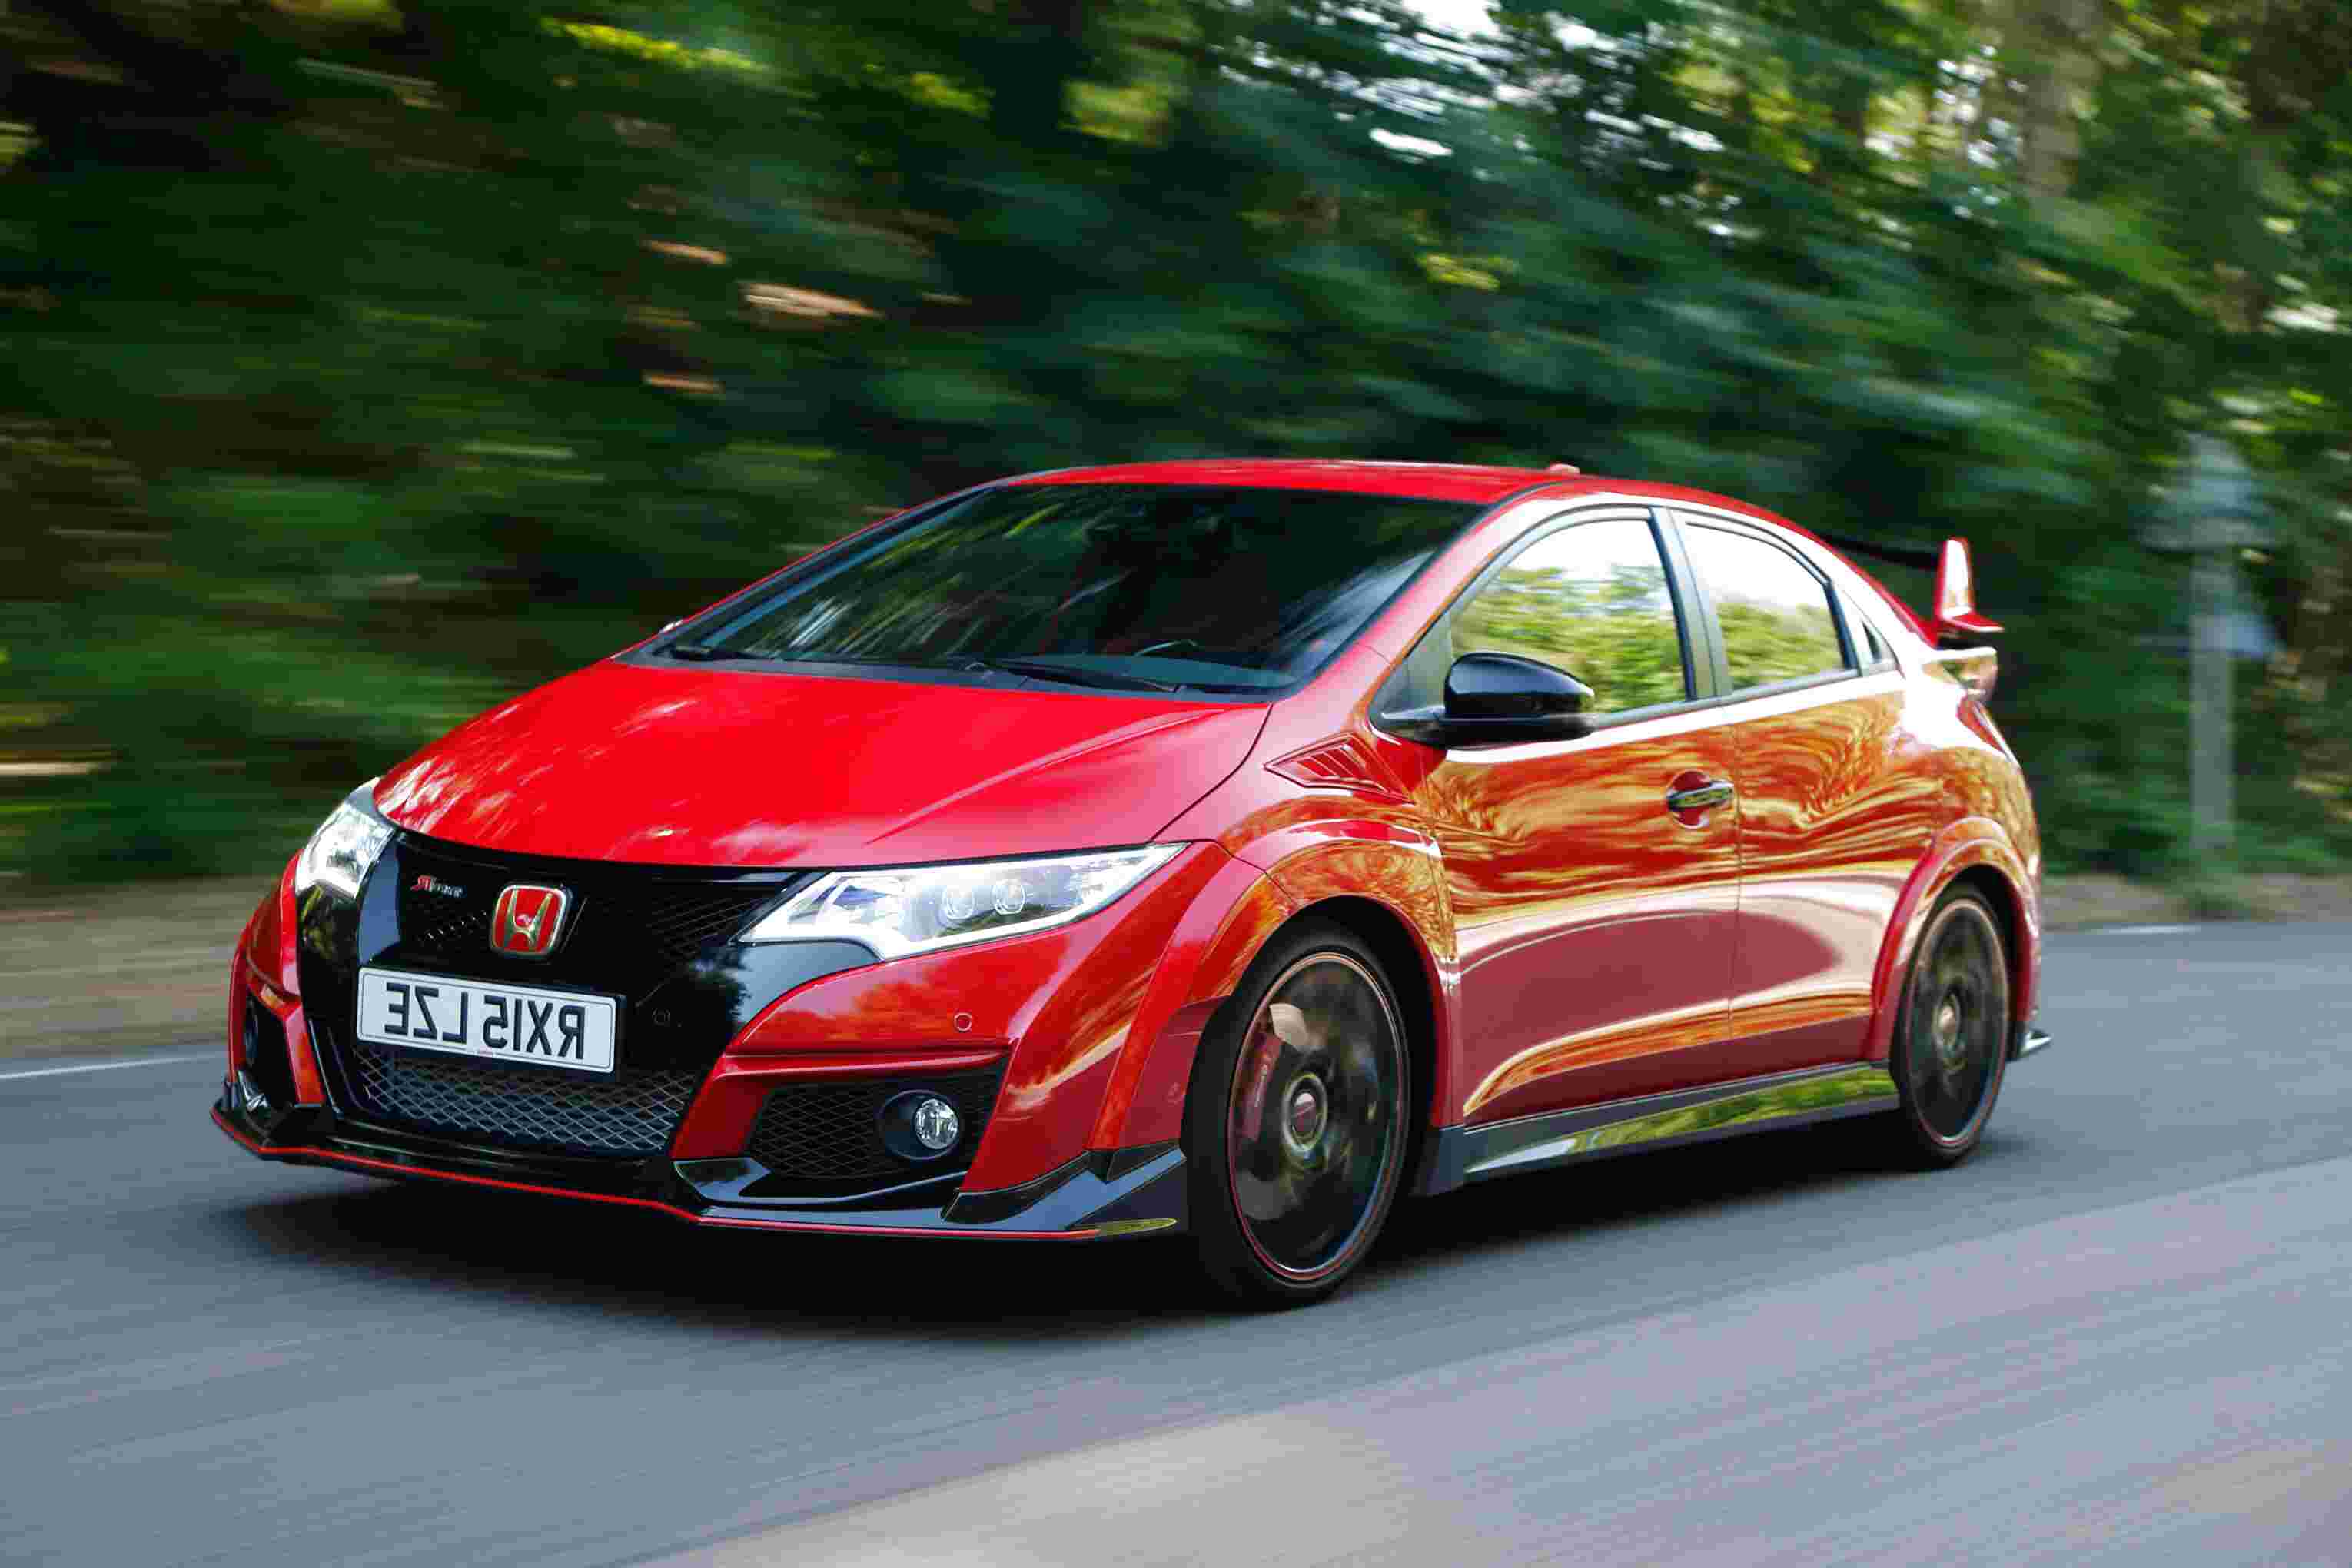 Honda Civic Type R 2016 for sale in UK View 65 bargains